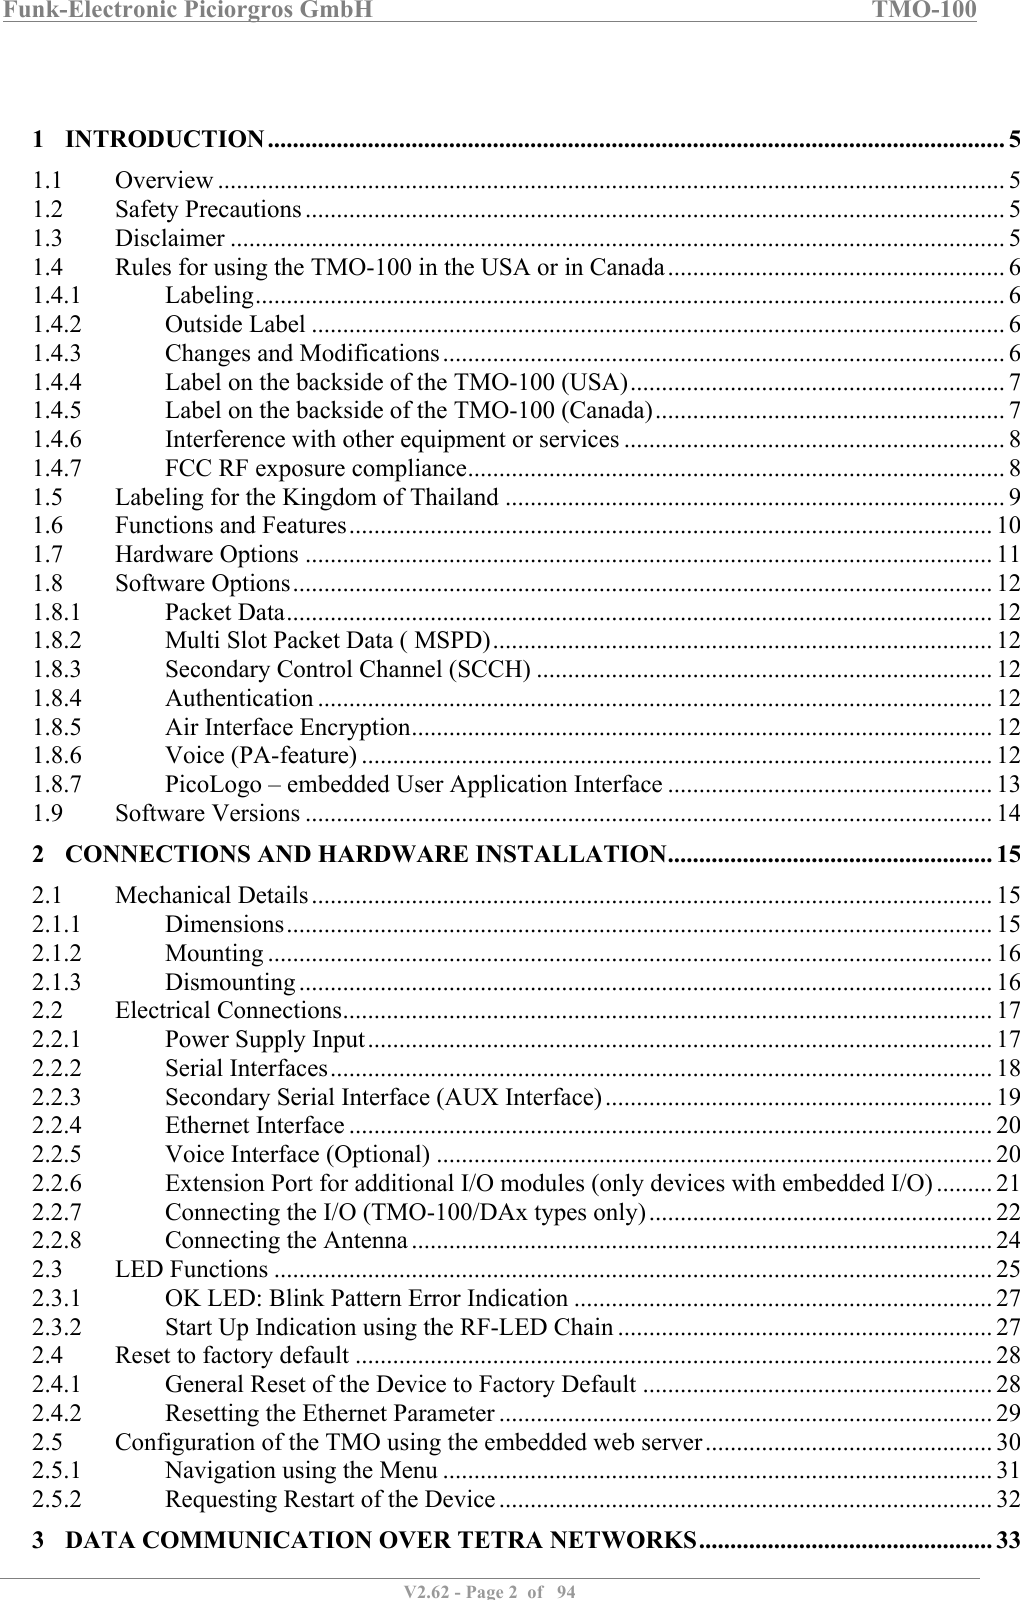 Funk-Electronic Piciorgros GmbH   TMO-100   V2.62 - Page 2  of   94     1 INTRODUCTION ...................................................................................................................... 5 1.1  Overview .............................................................................................................................. 5 1.2  Safety Precautions ................................................................................................................ 5 1.3  Disclaimer ............................................................................................................................ 5 1.4  Rules for using the TMO-100 in the USA or in Canada ...................................................... 6 1.4.1  Labeling ........................................................................................................................ 6 1.4.2  Outside Label ............................................................................................................... 6 1.4.3  Changes and Modifications .......................................................................................... 6 1.4.4  Label on the backside of the TMO-100 (USA) ............................................................ 7 1.4.5  Label on the backside of the TMO-100 (Canada) ........................................................ 7 1.4.6  Interference with other equipment or services ............................................................. 8 1.4.7  FCC RF exposure compliance ...................................................................................... 8 1.5  Labeling for the Kingdom of Thailand ................................................................................ 9 1.6  Functions and Features ....................................................................................................... 10 1.7  Hardware Options .............................................................................................................. 11 1.8  Software Options ................................................................................................................ 12 1.8.1  Packet Data ................................................................................................................. 12 1.8.2  Multi Slot Packet Data ( MSPD) ................................................................................ 12 1.8.3  Secondary Control Channel (SCCH) ......................................................................... 12 1.8.4  Authentication ............................................................................................................ 12 1.8.5  Air Interface Encryption ............................................................................................. 12 1.8.6  Voice (PA-feature) ..................................................................................................... 12 1.8.7  PicoLogo – embedded User Application Interface .................................................... 13 1.9  Software Versions .............................................................................................................. 14 2 CONNECTIONS AND HARDWARE INSTALLATION .................................................... 15 2.1  Mechanical Details ............................................................................................................. 15 2.1.1  Dimensions ................................................................................................................. 15 2.1.2  Mounting .................................................................................................................... 16 2.1.3  Dismounting ............................................................................................................... 16 2.2  Electrical Connections ........................................................................................................ 17 2.2.1  Power Supply Input .................................................................................................... 17 2.2.2  Serial Interfaces .......................................................................................................... 18 2.2.3  Secondary Serial Interface (AUX Interface) .............................................................. 19 2.2.4  Ethernet Interface ....................................................................................................... 20 2.2.5  Voice Interface (Optional) ......................................................................................... 20 2.2.6  Extension Port for additional I/O modules (only devices with embedded I/O) ......... 21 2.2.7  Connecting the I/O (TMO-100/DAx types only) ....................................................... 22 2.2.8  Connecting the Antenna ............................................................................................. 24 2.3  LED Functions ................................................................................................................... 25 2.3.1  OK LED: Blink Pattern Error Indication ................................................................... 27 2.3.2  Start Up Indication using the RF-LED Chain ............................................................ 27 2.4  Reset to factory default ...................................................................................................... 28 2.4.1  General Reset of the Device to Factory Default ........................................................ 28 2.4.2  Resetting the Ethernet Parameter ............................................................................... 29 2.5  Configuration of the TMO using the embedded web server .............................................. 30 2.5.1  Navigation using the Menu ........................................................................................ 31 2.5.2  Requesting Restart of the Device ............................................................................... 32 3 DATA COMMUNICATION OVER TETRA NETWORKS ............................................... 33 